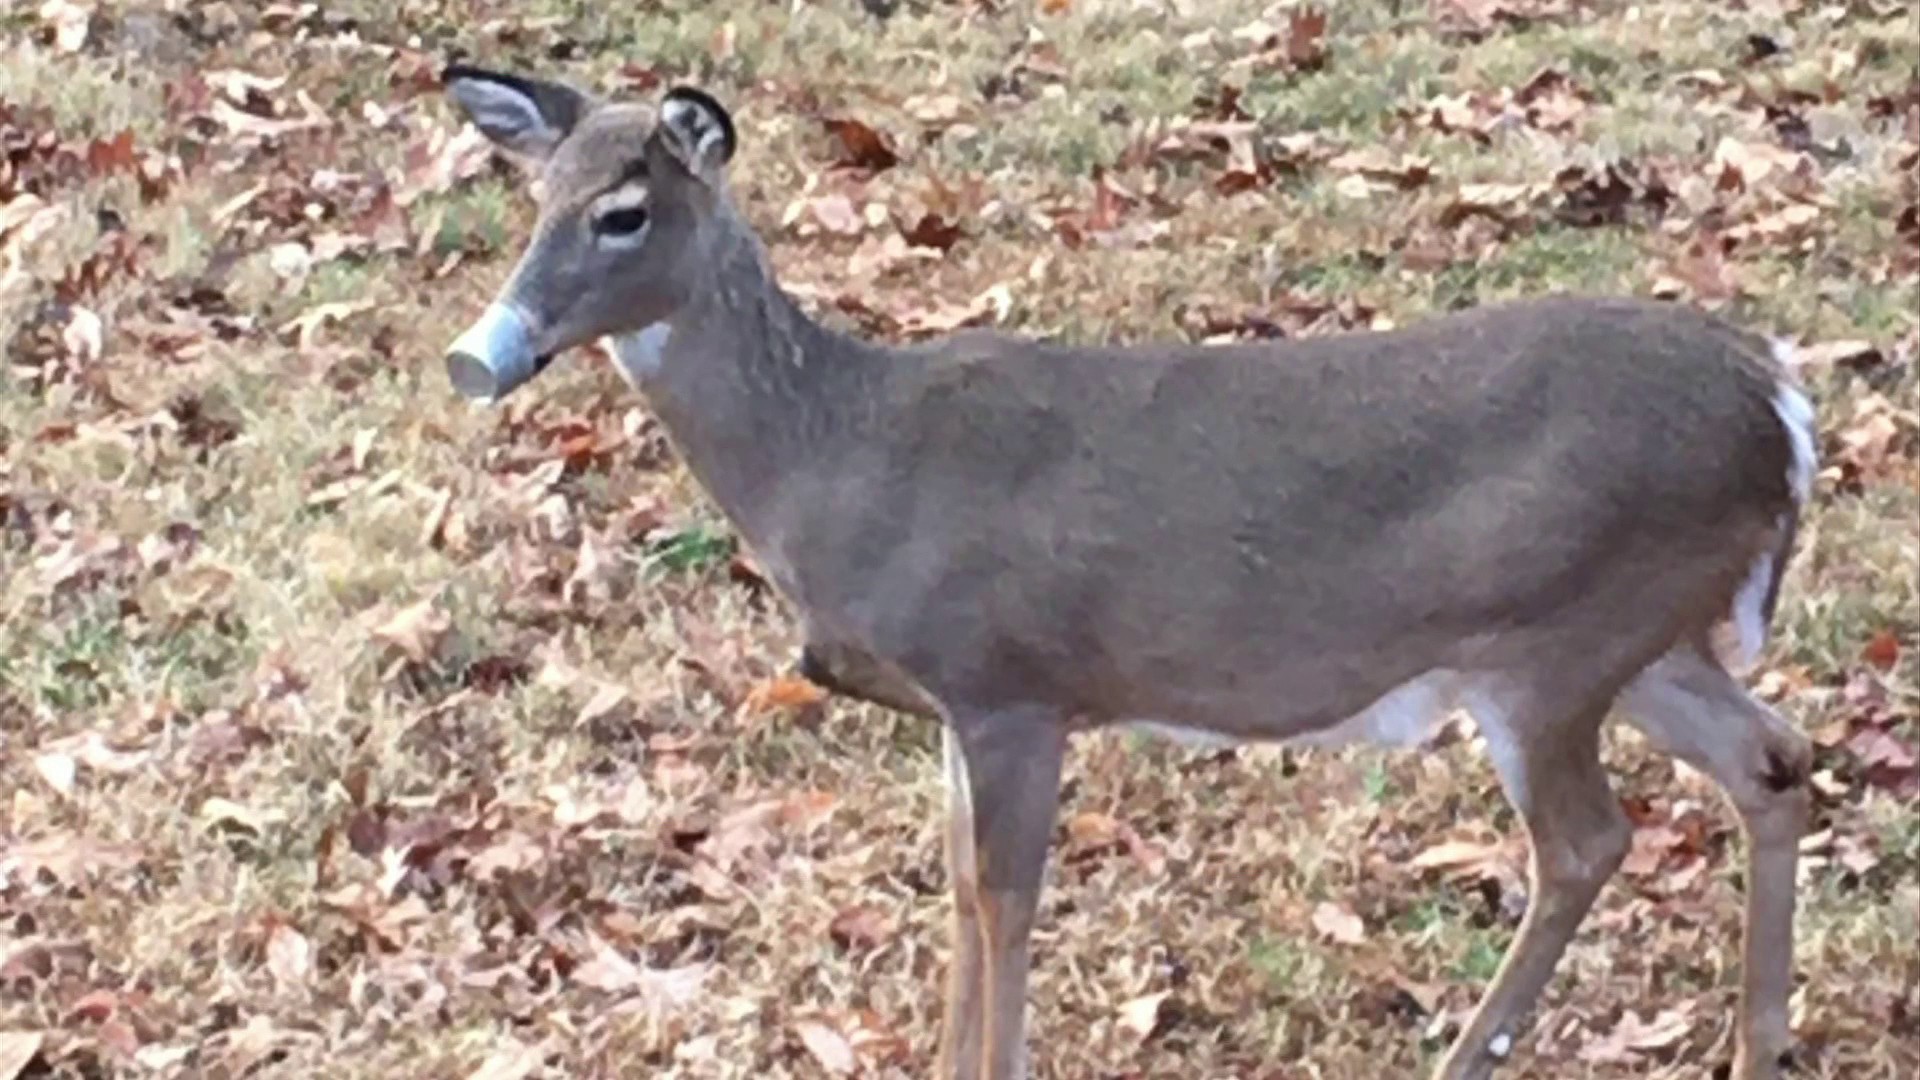 We're loving our wildlife to death': Officials warn of feeding wildlife  after deer found with can stuck on nose